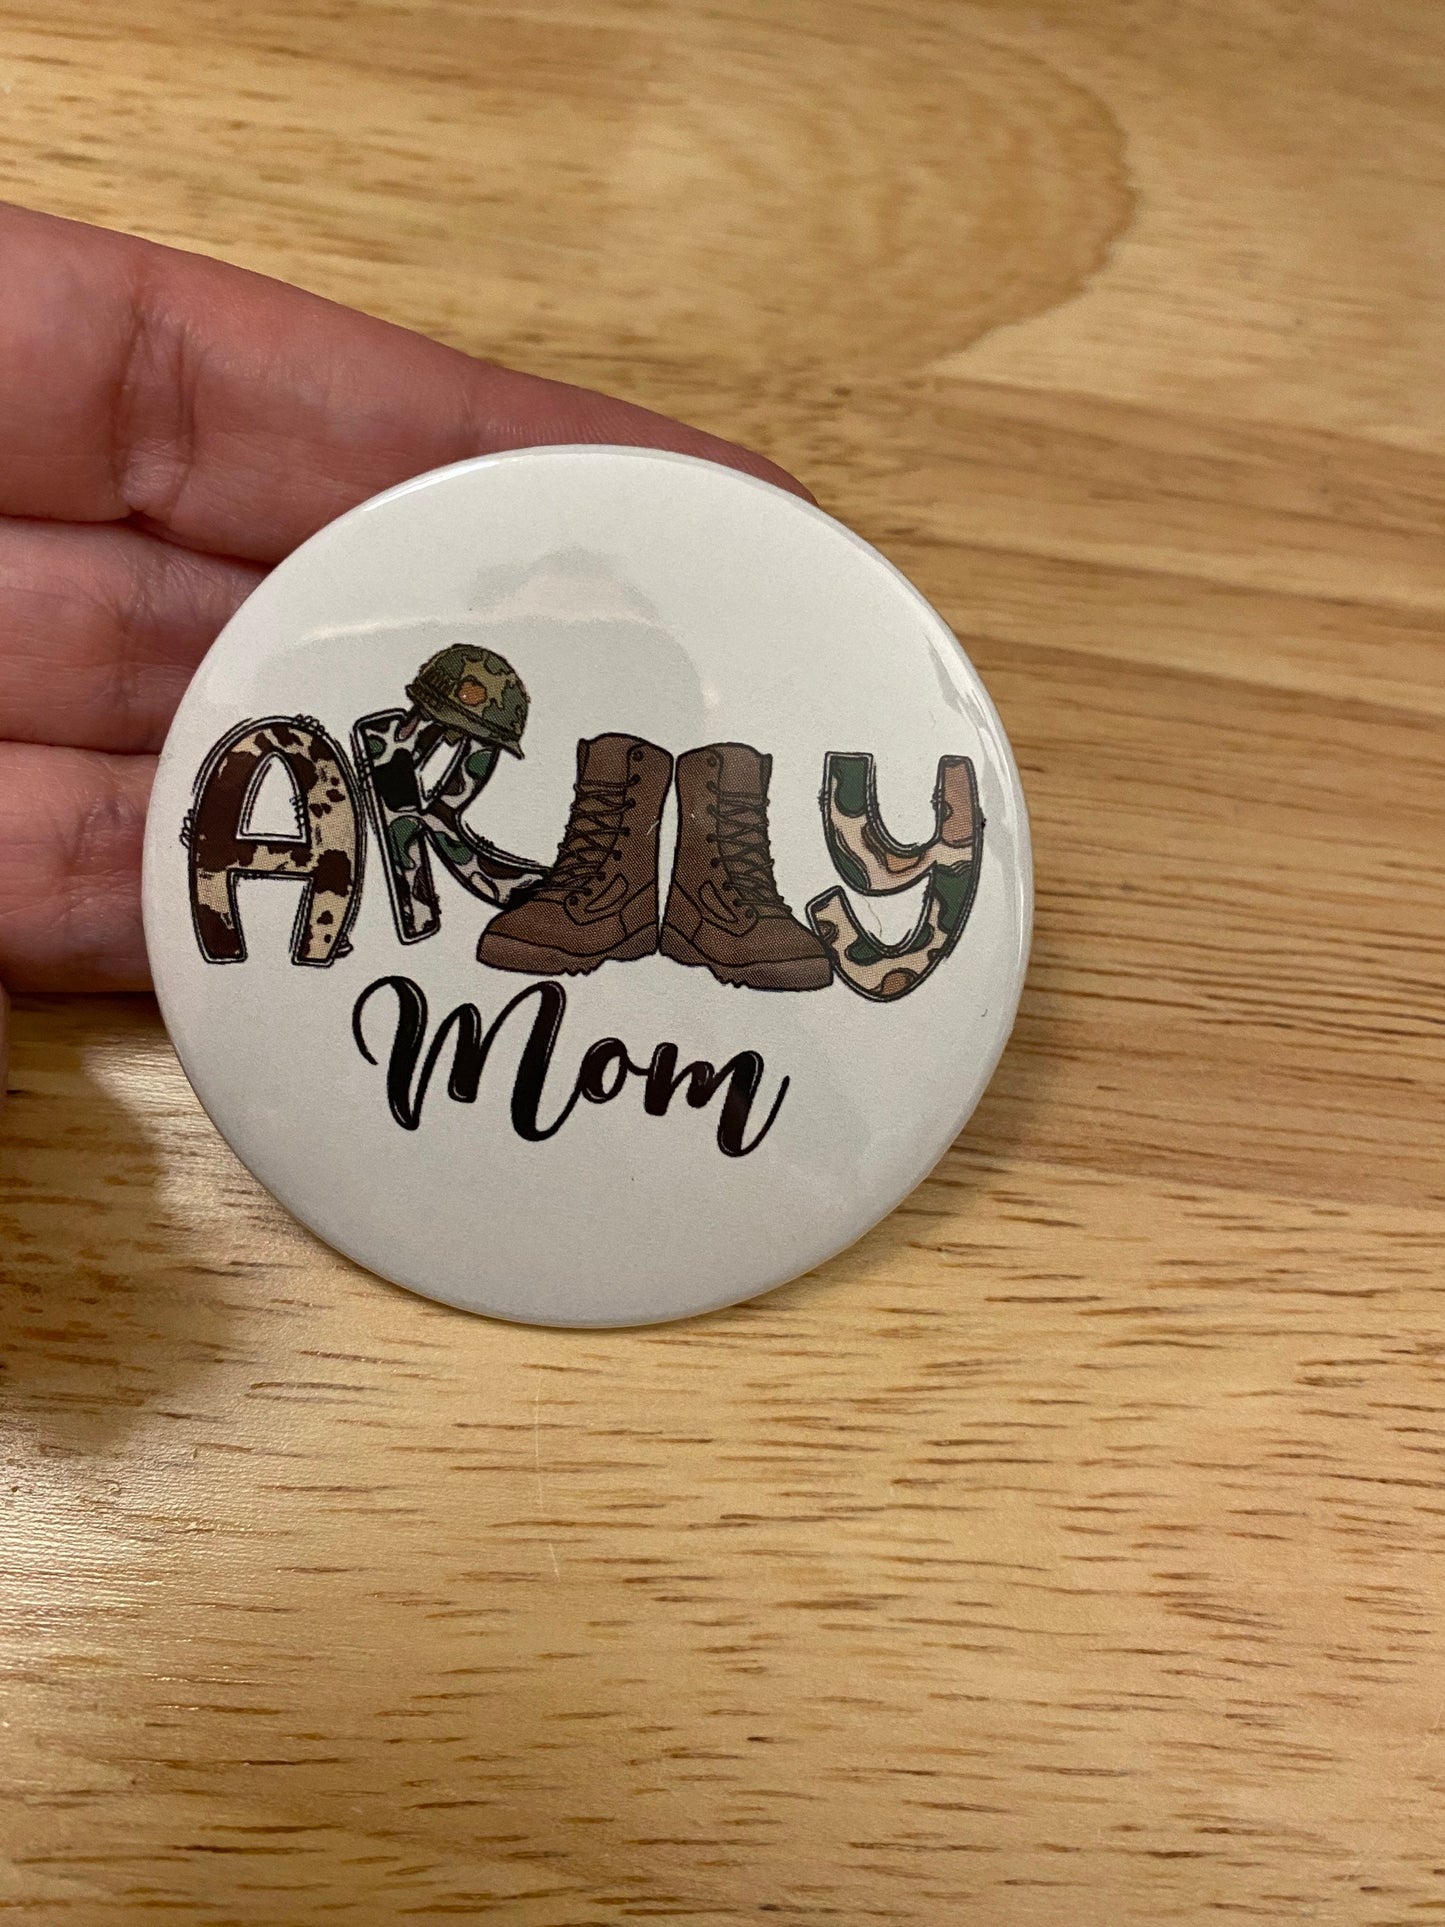 Army mom 2.25" Button Pins or 1.25" Button options, Back Pack Decoration, Military Boots design, Military mom pin